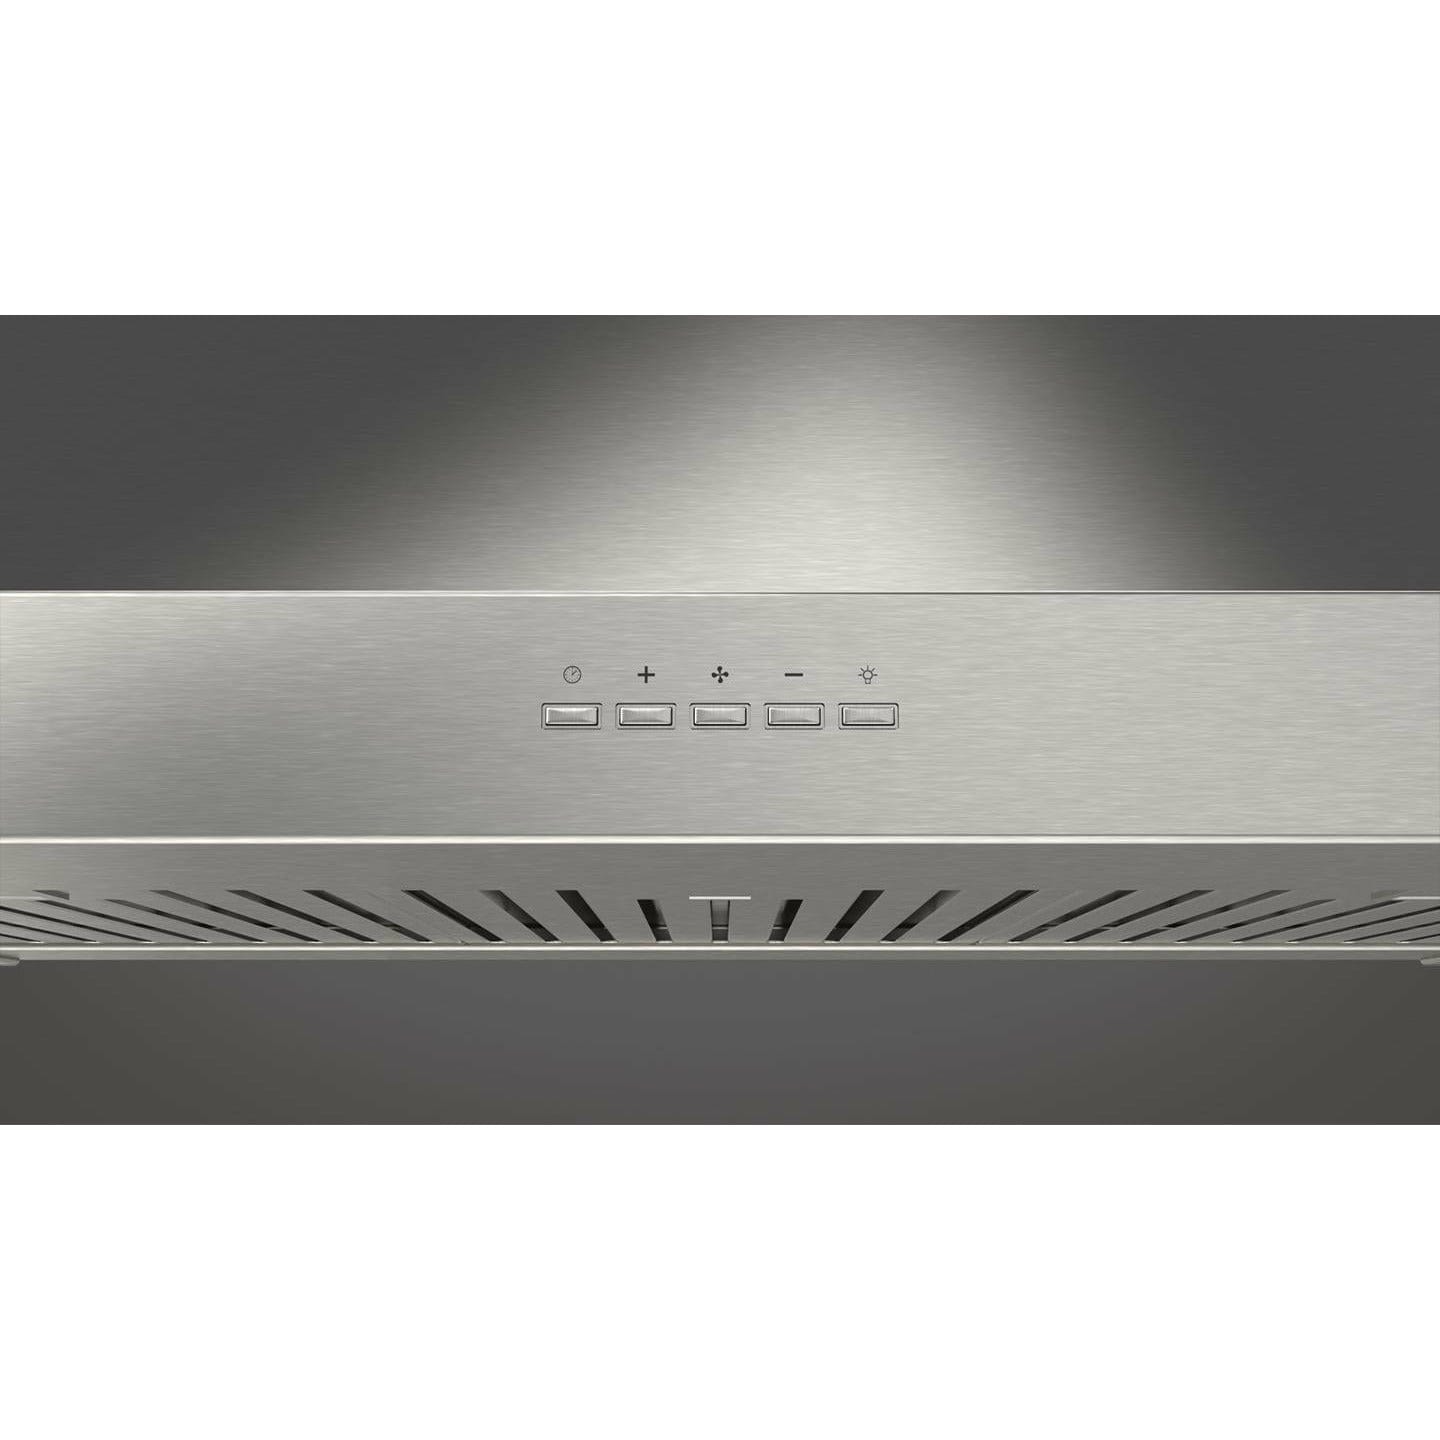 Fulgor Milano 30" Under Cabinet Range Hood with 4-Speed/450 CFM Blower, Stainless Steel - F4UC30S1 Hoods F4UC30S1 Luxury Appliances Direct